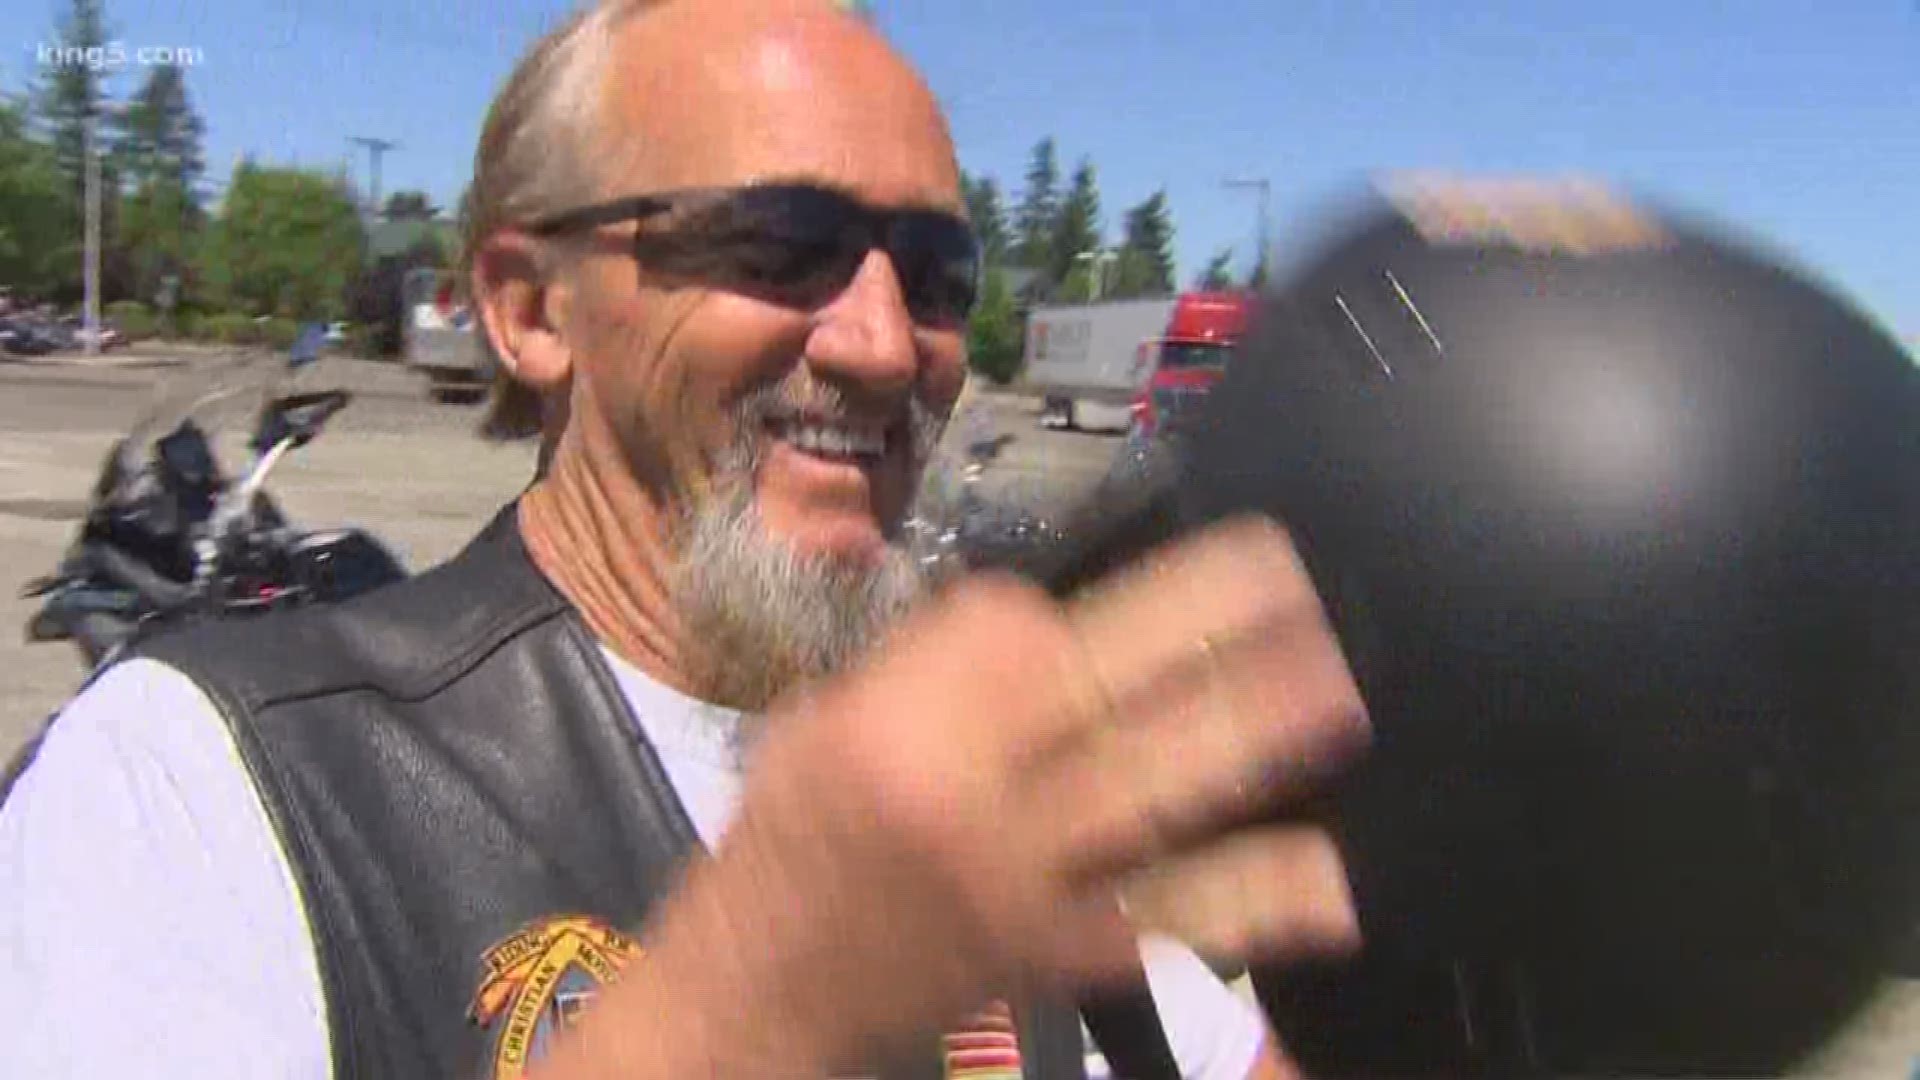 Motorcycle owners might be able to ride without helmets again soon. There's a move to repeal Washington's motorcycle helmet law, for those over 21. While motorcycle riders lined up to tell lawmakers that would be a good idea. South Bureau Chief Drew Mikkelsen spoke with one who says riding without a helmet is a mistake he'll never make again.